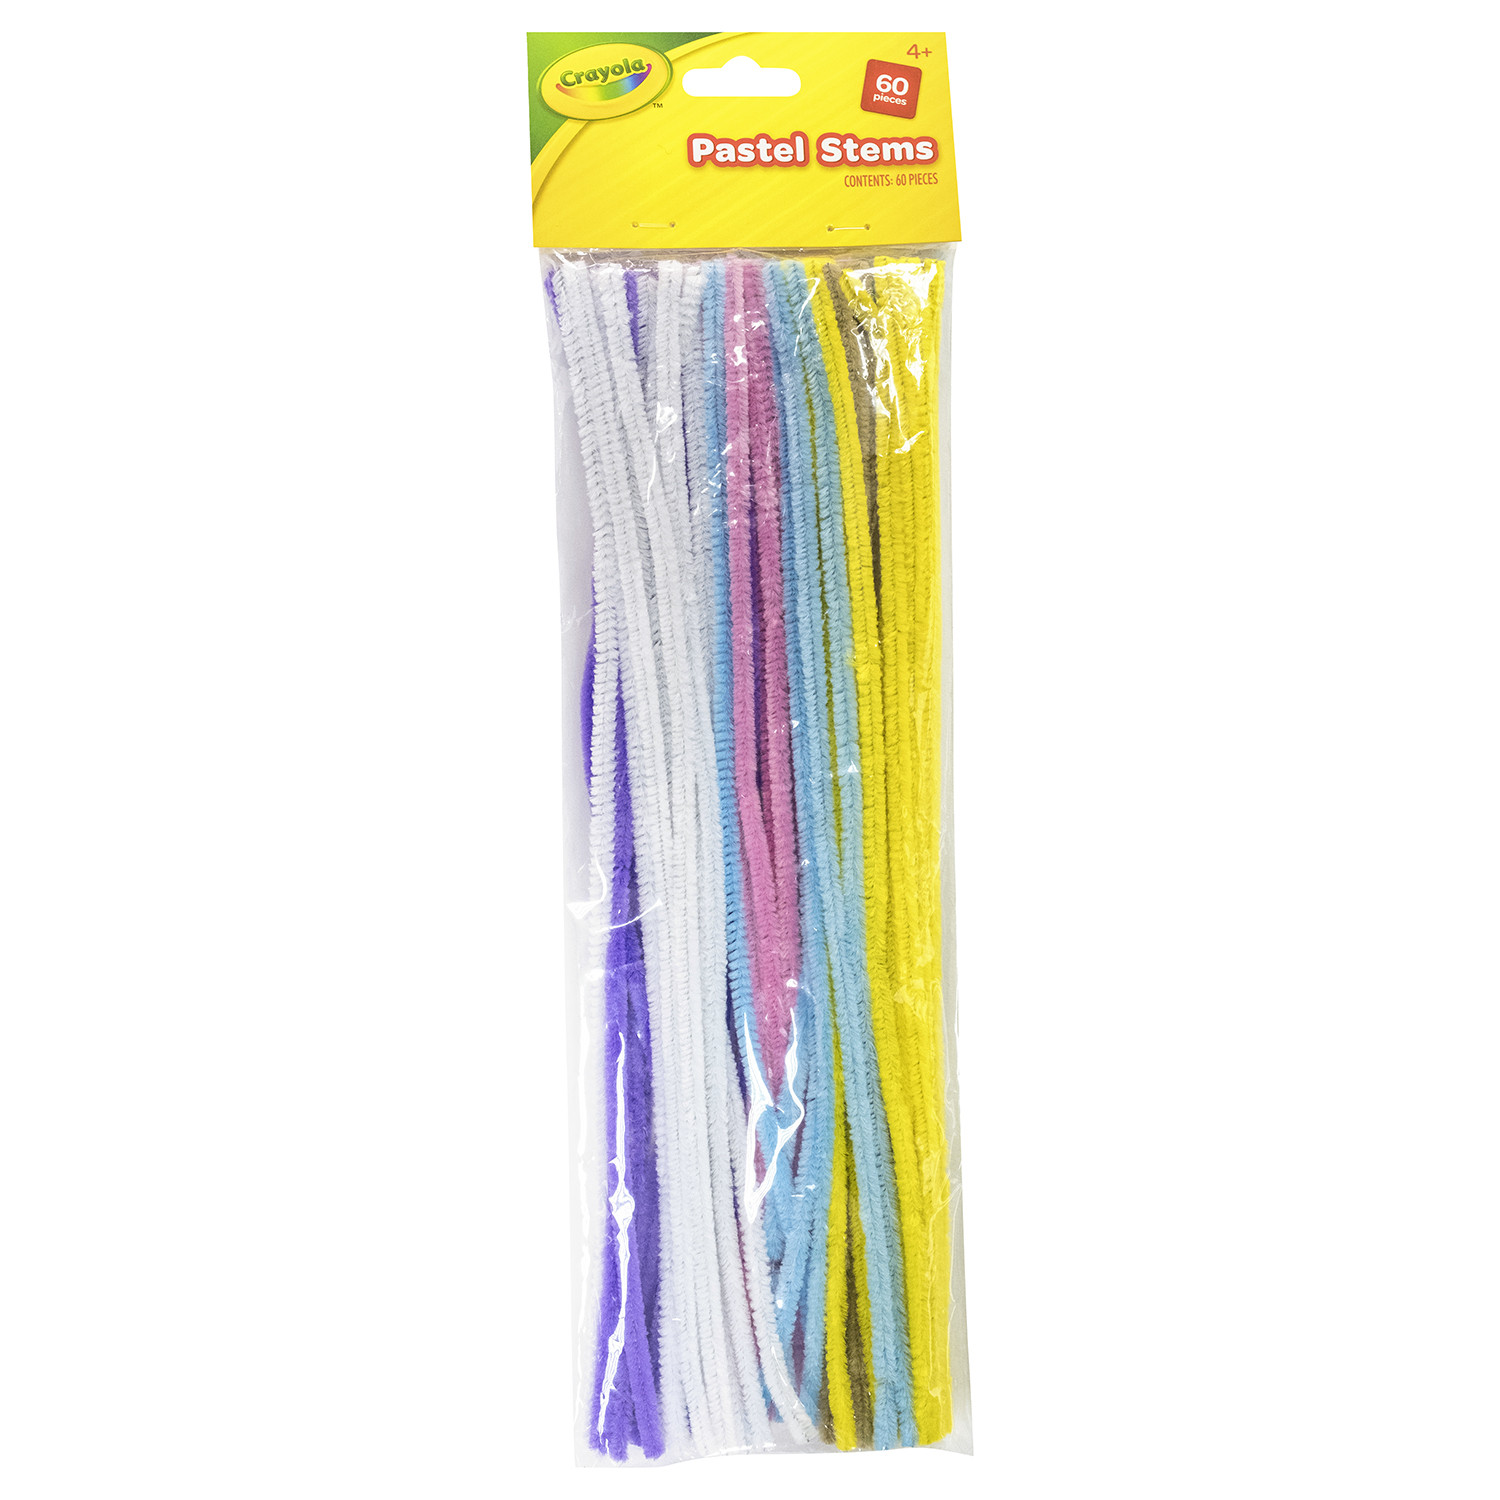 Pack of 60 Crayola Assorted Pastel Stems Image